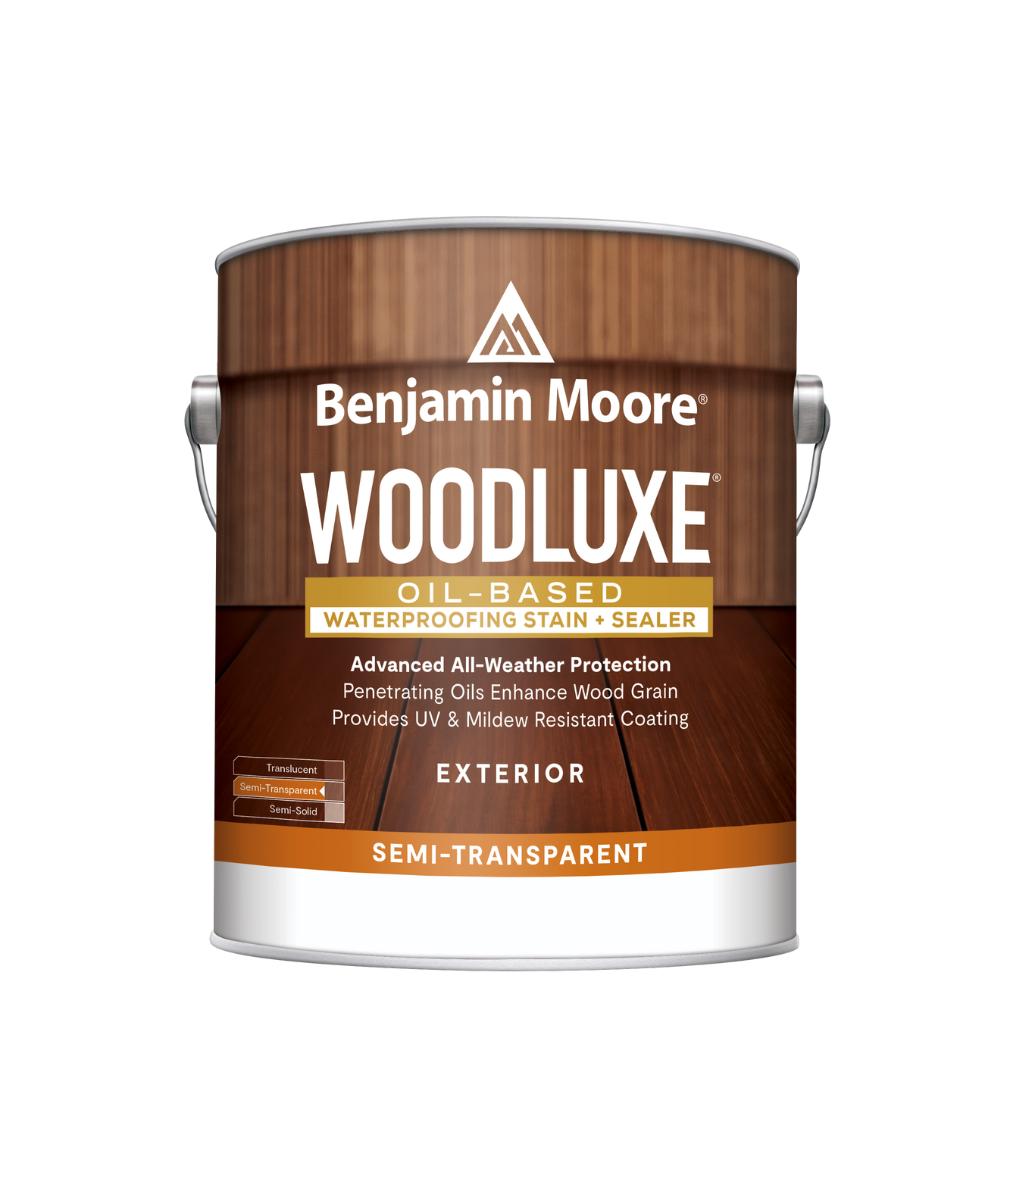 Benjamin Moore Woodluxe Oil-Based Semi-Transparent available at Wallauer.